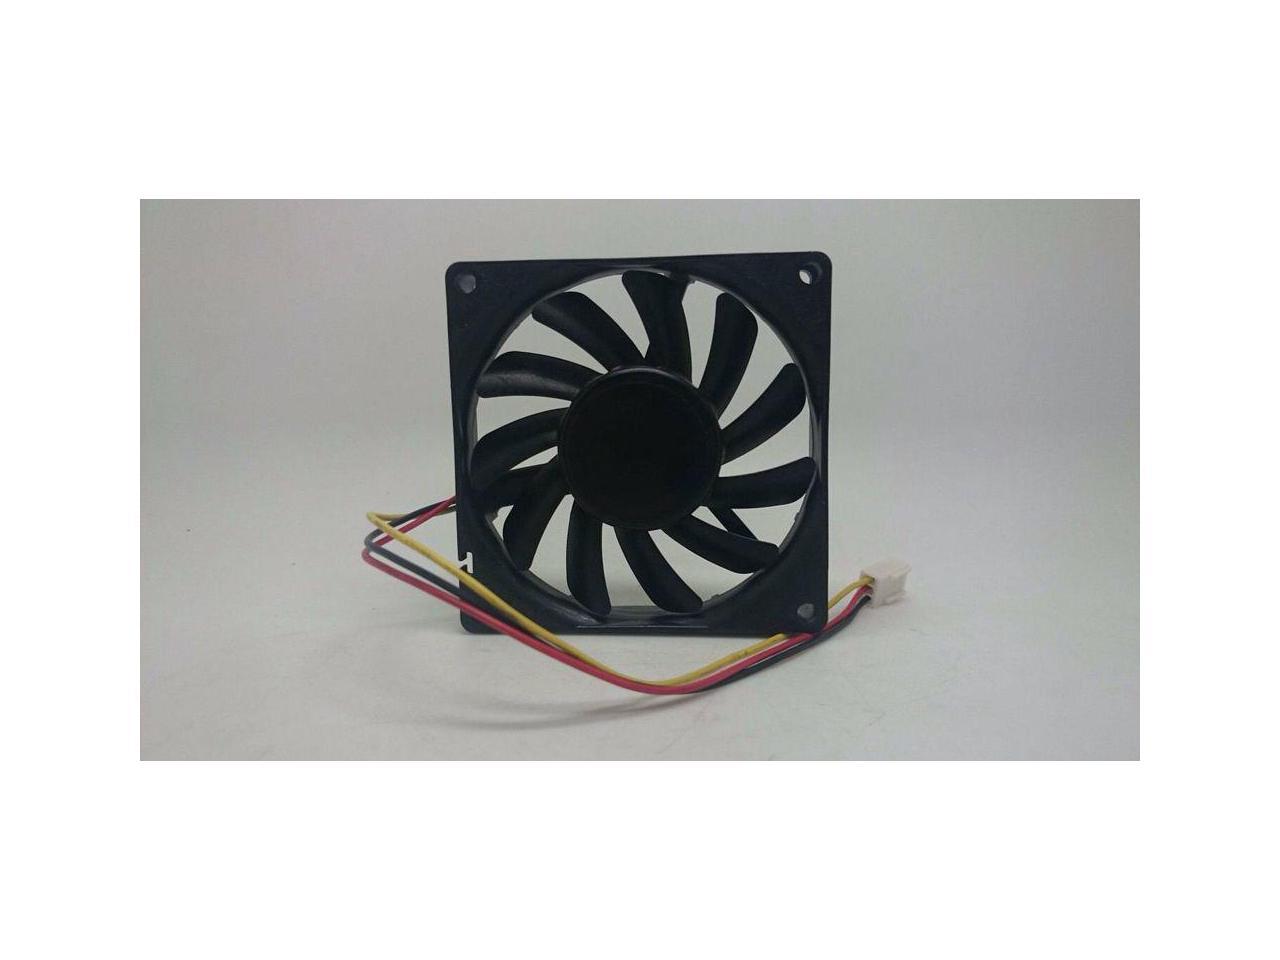 Original For Sanyo 9G1224G4D03 12025 24V 120mm 12CM 0.47A 3P axial cooling fan 